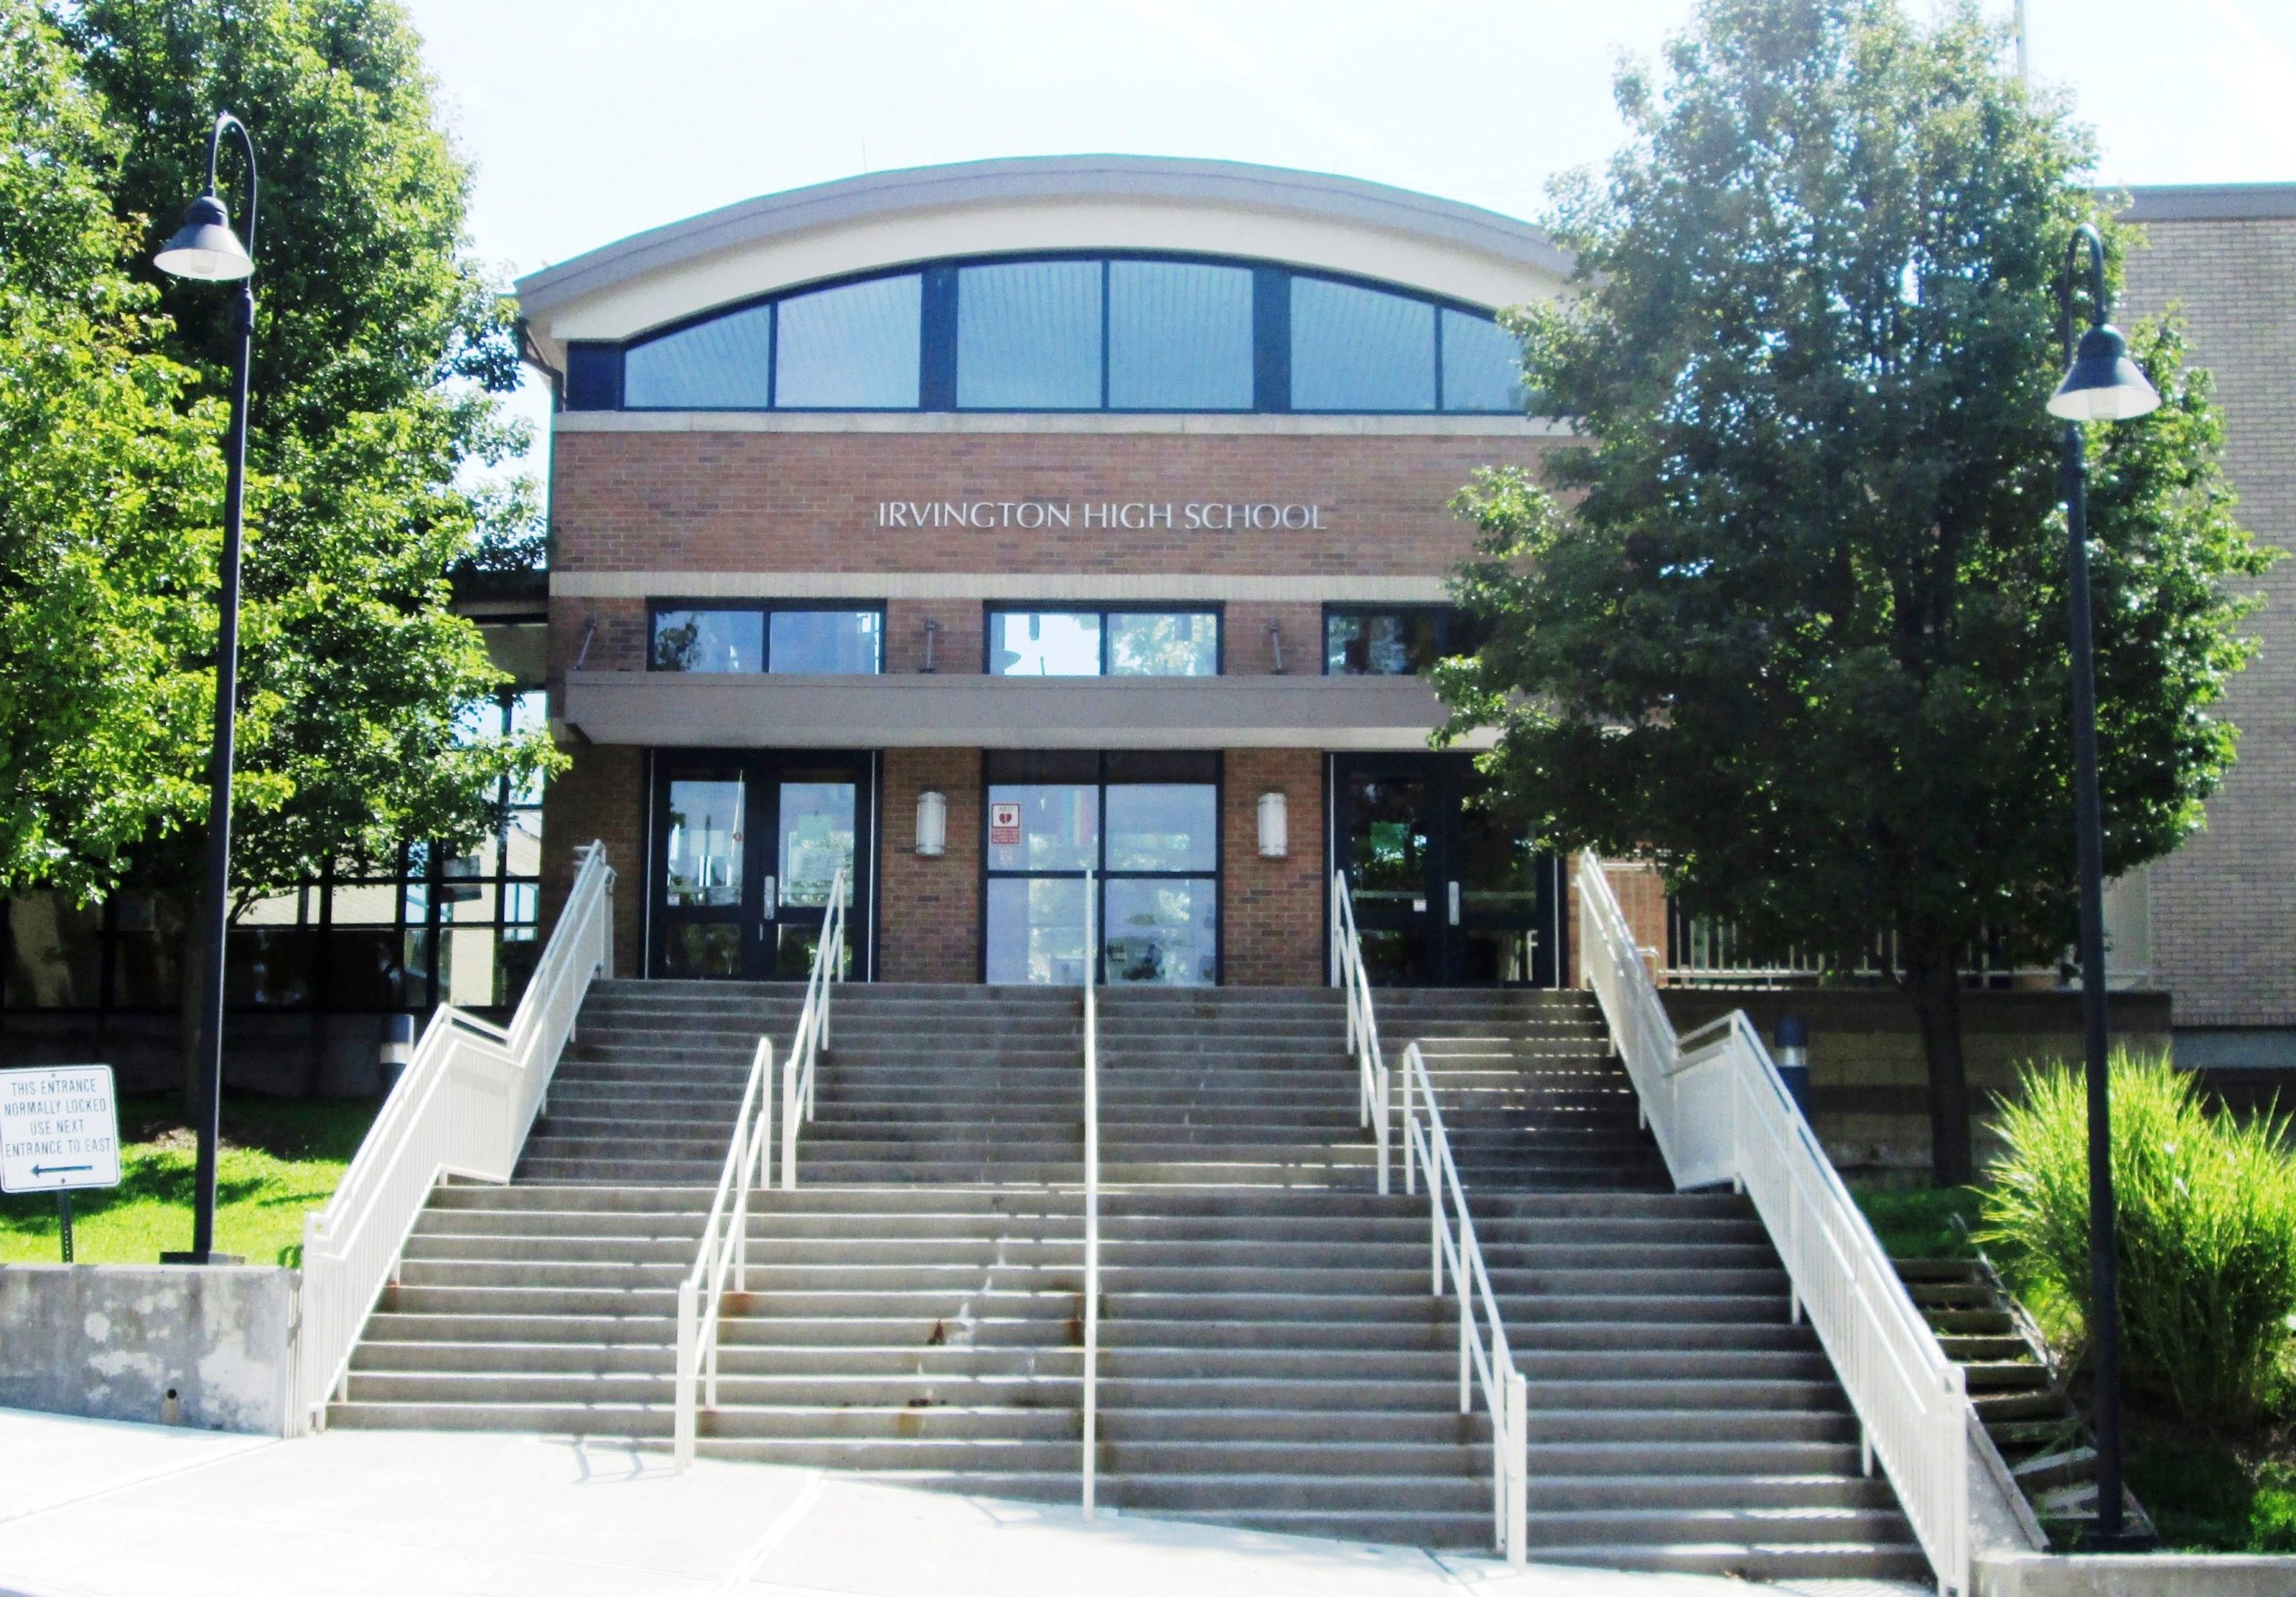 Image of entrance to a high school